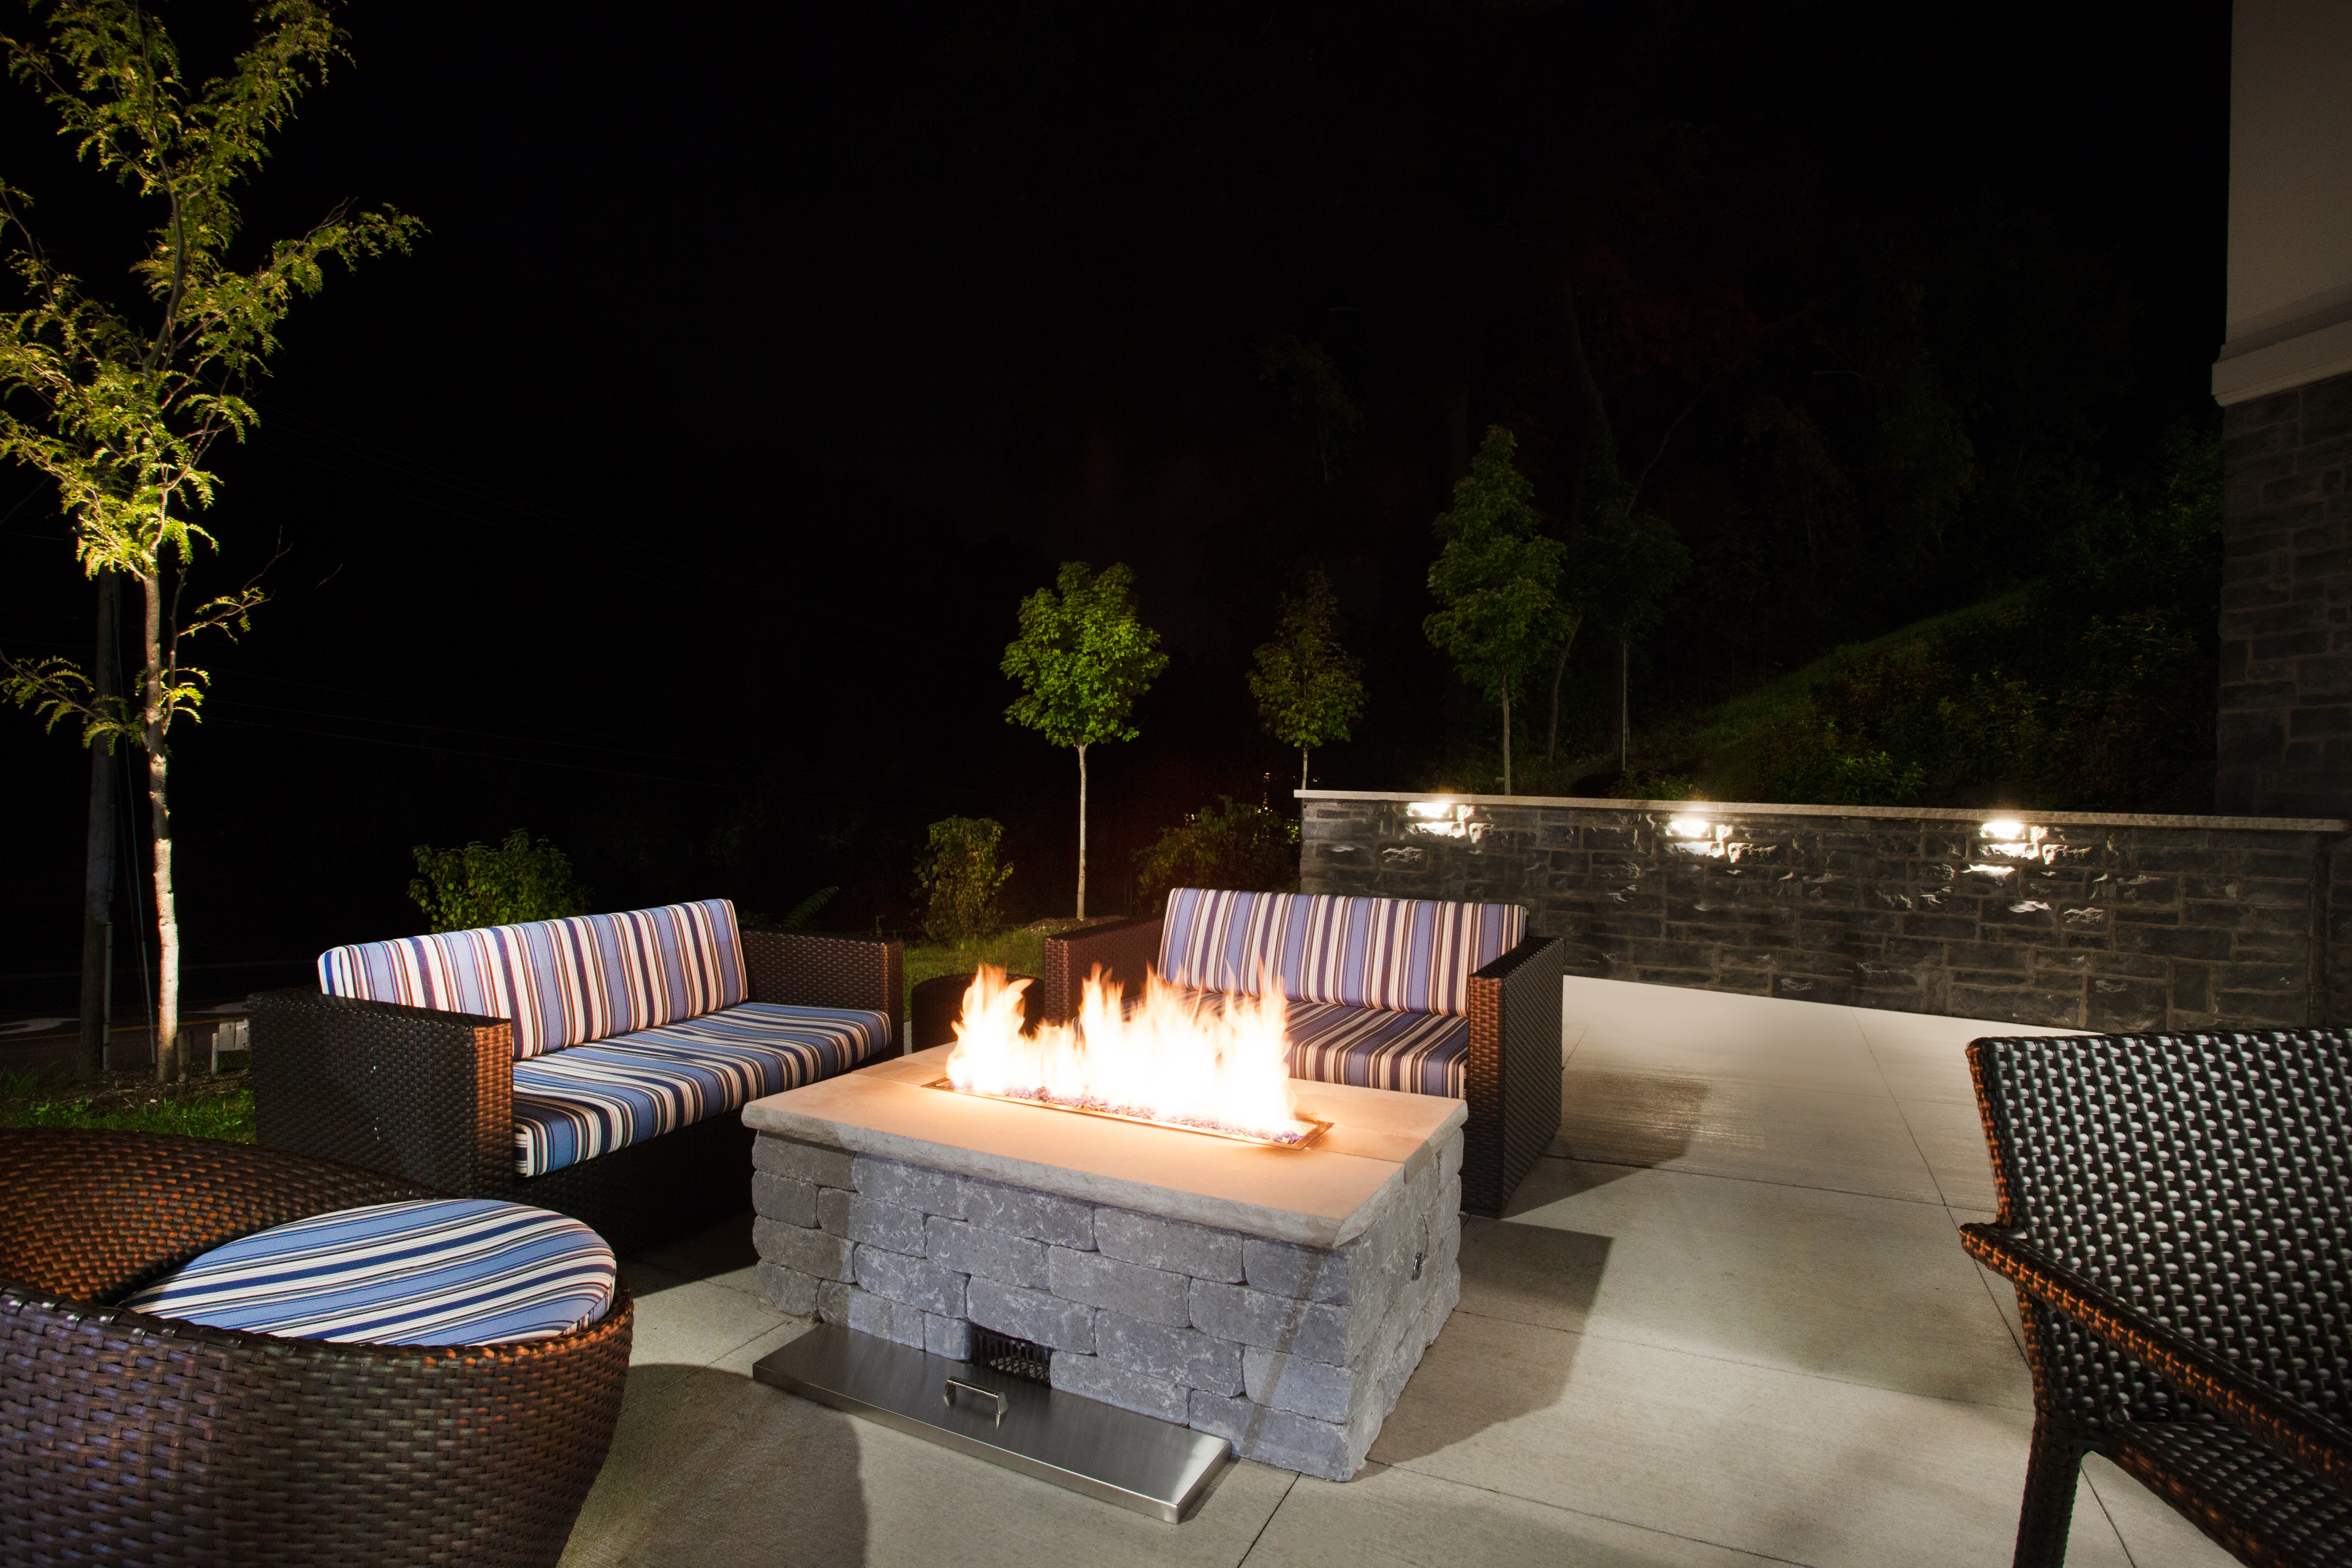 Outdoor Patio Seating Area with Fire Pit at Night